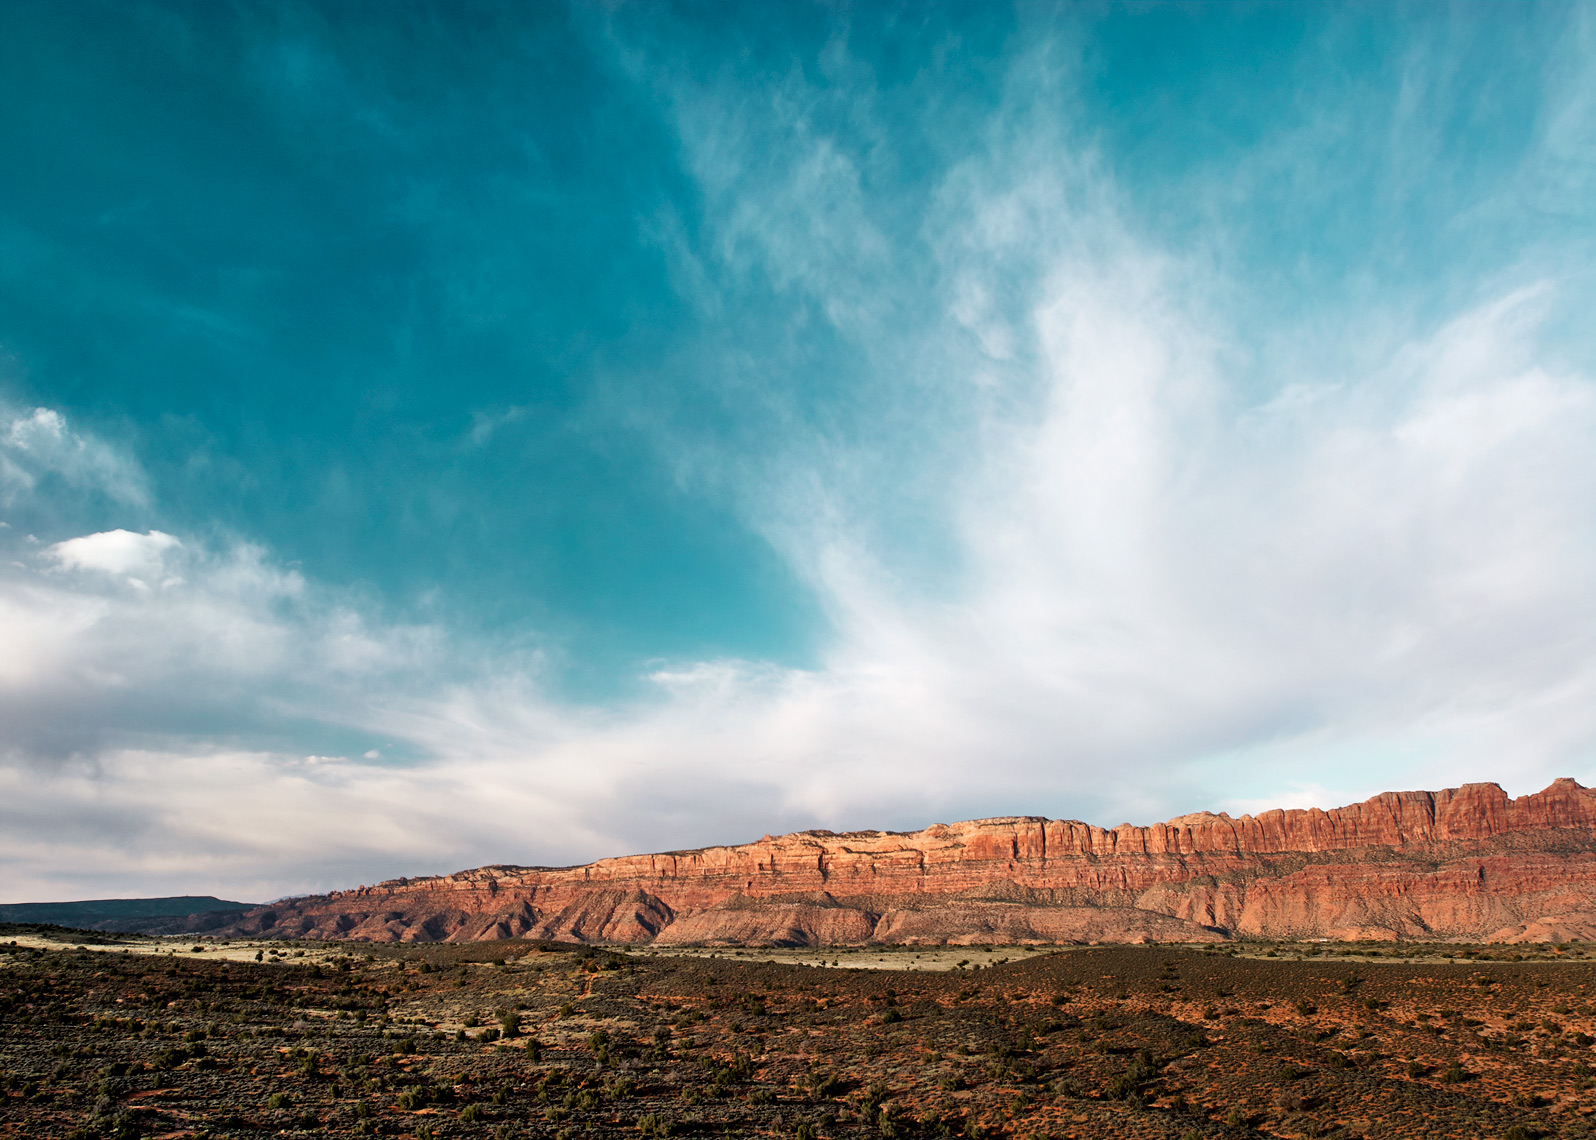 Moab rocks and cloud formations in this large-scale landscape